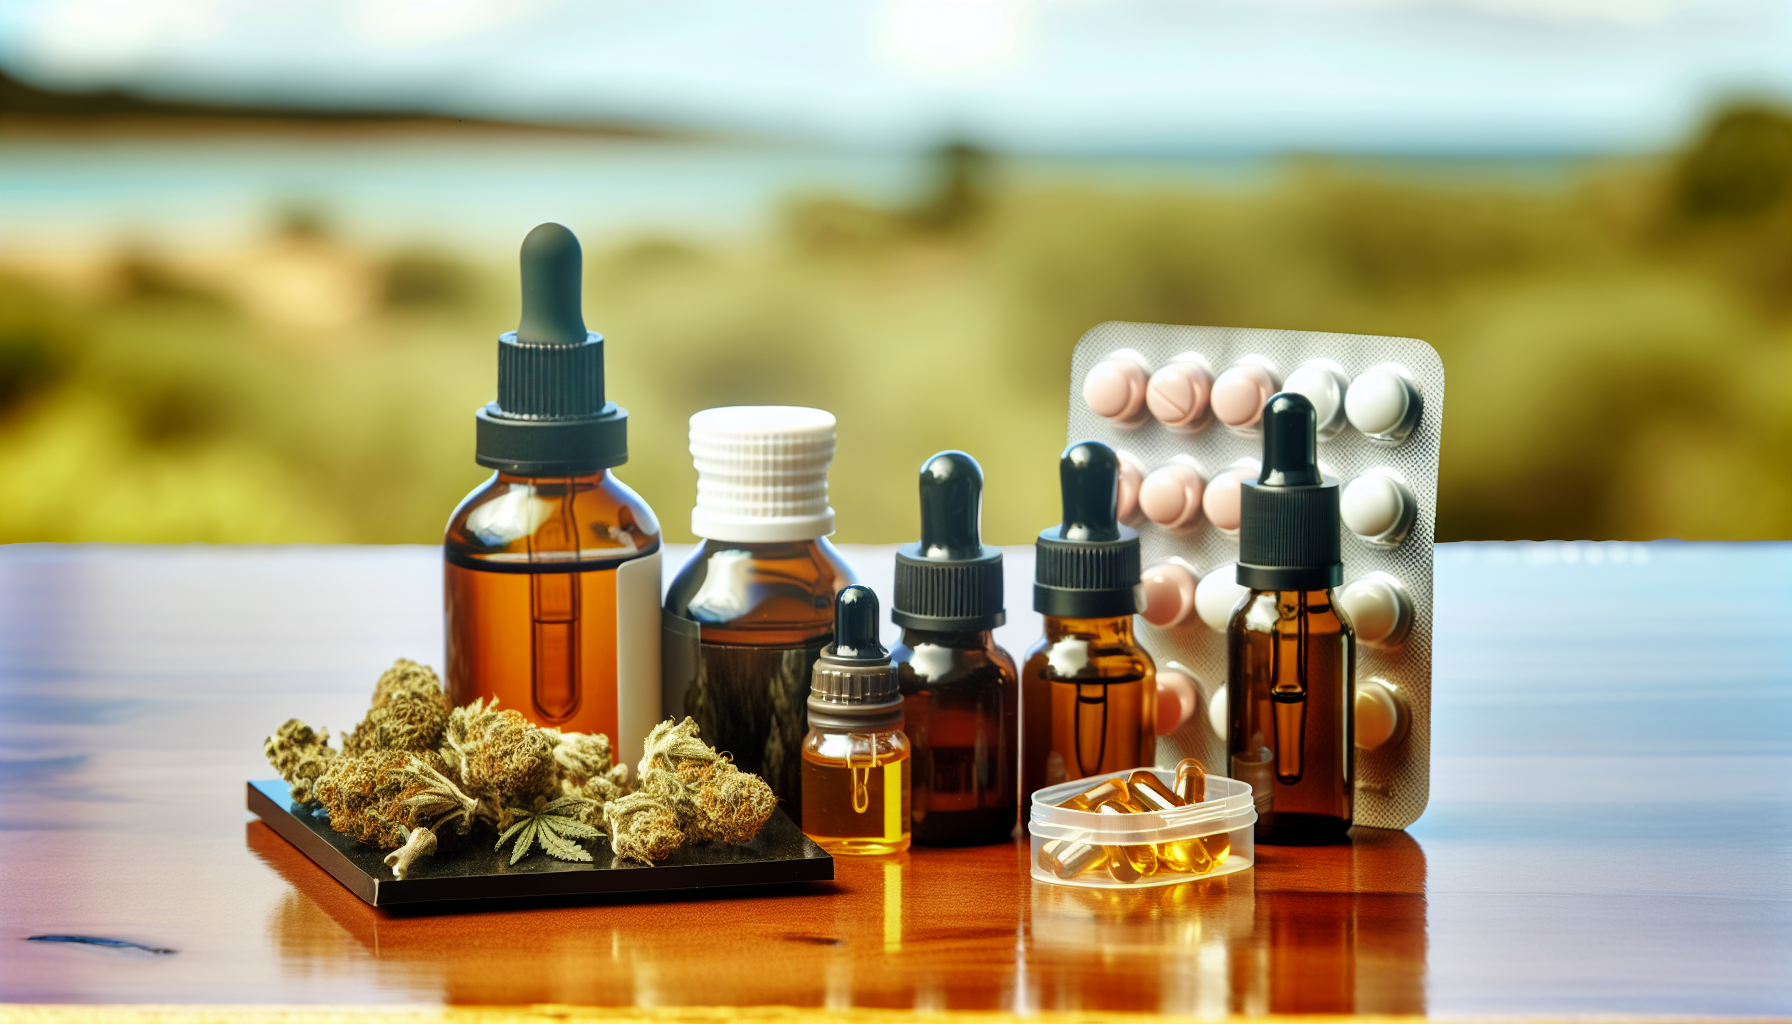 Medicinal cannabis products in Australia